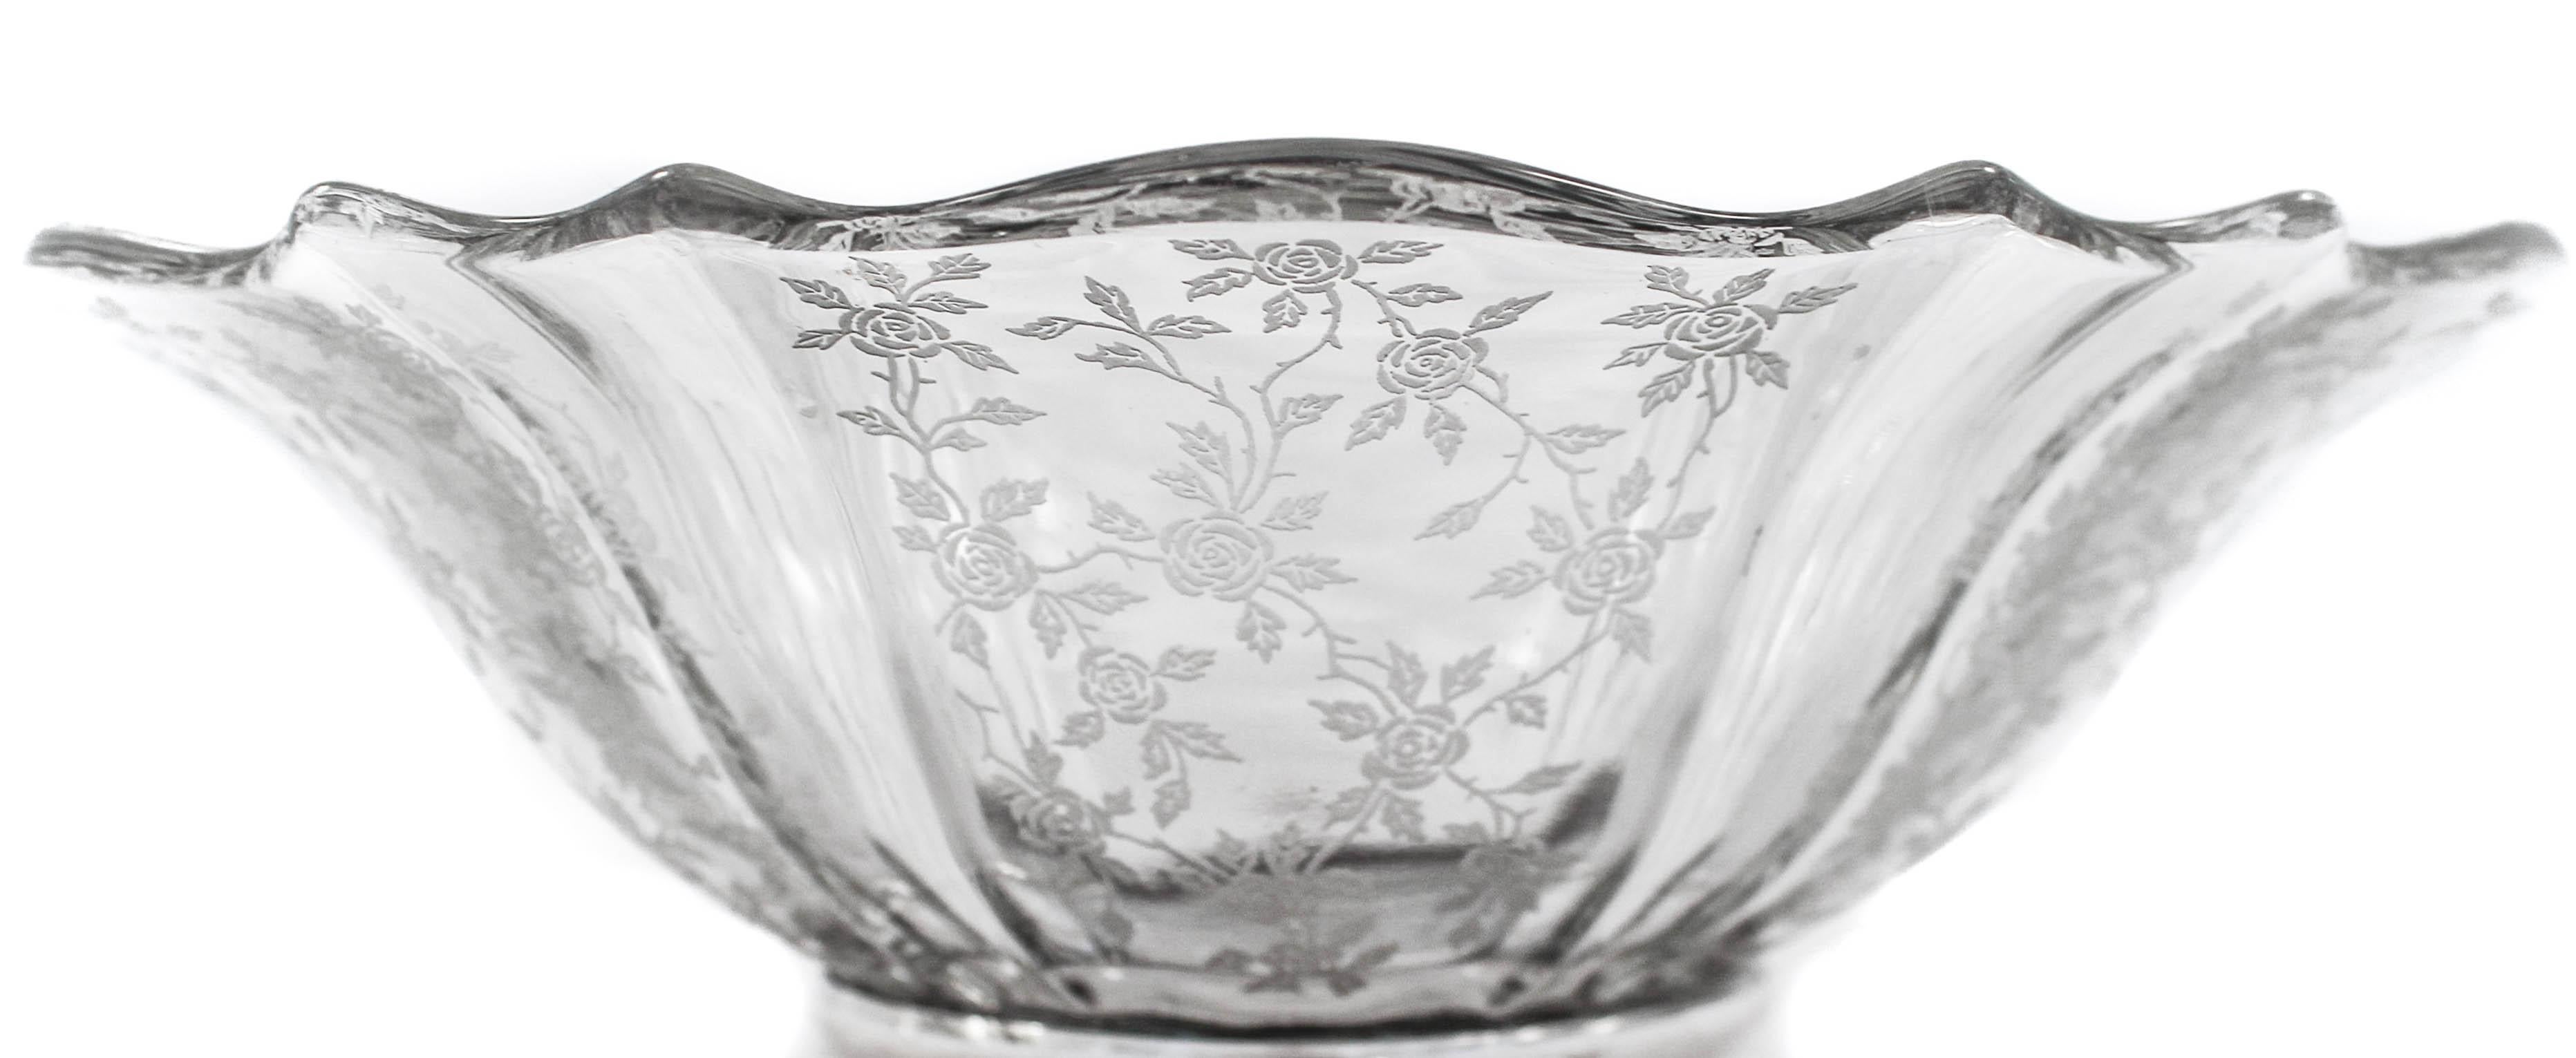 Being offered is a crystal bowl with a sterling silver base made by Hawkes Glass Company.
Based in Corning, NY, T.G. Hawkes & Co. (c.1880-1959) was established by Thomas Gibbons Hawkes (1846-1913). Born in Ireland, Hawkes immigrated to Brooklyn in